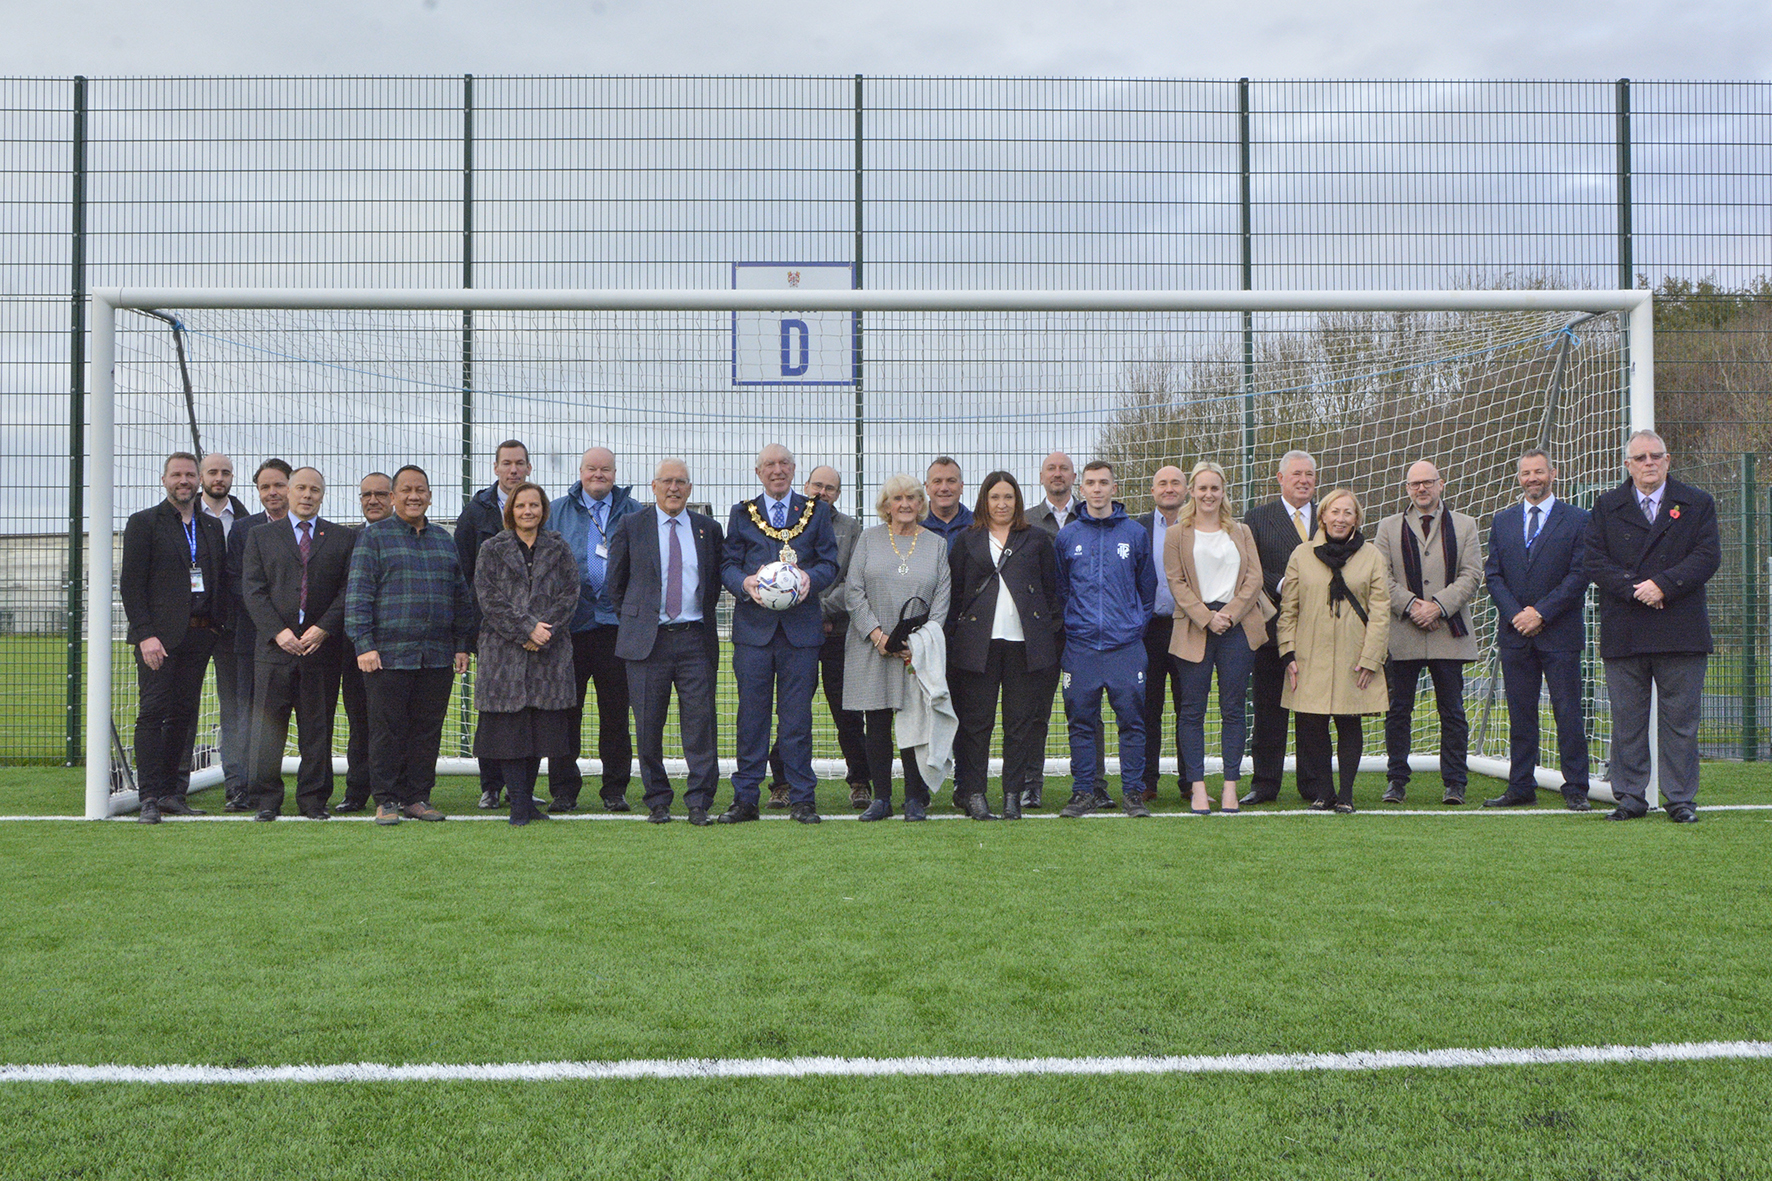 The new 3G pitch was officially opened on November 10, but it was already being utilised by the public from early September